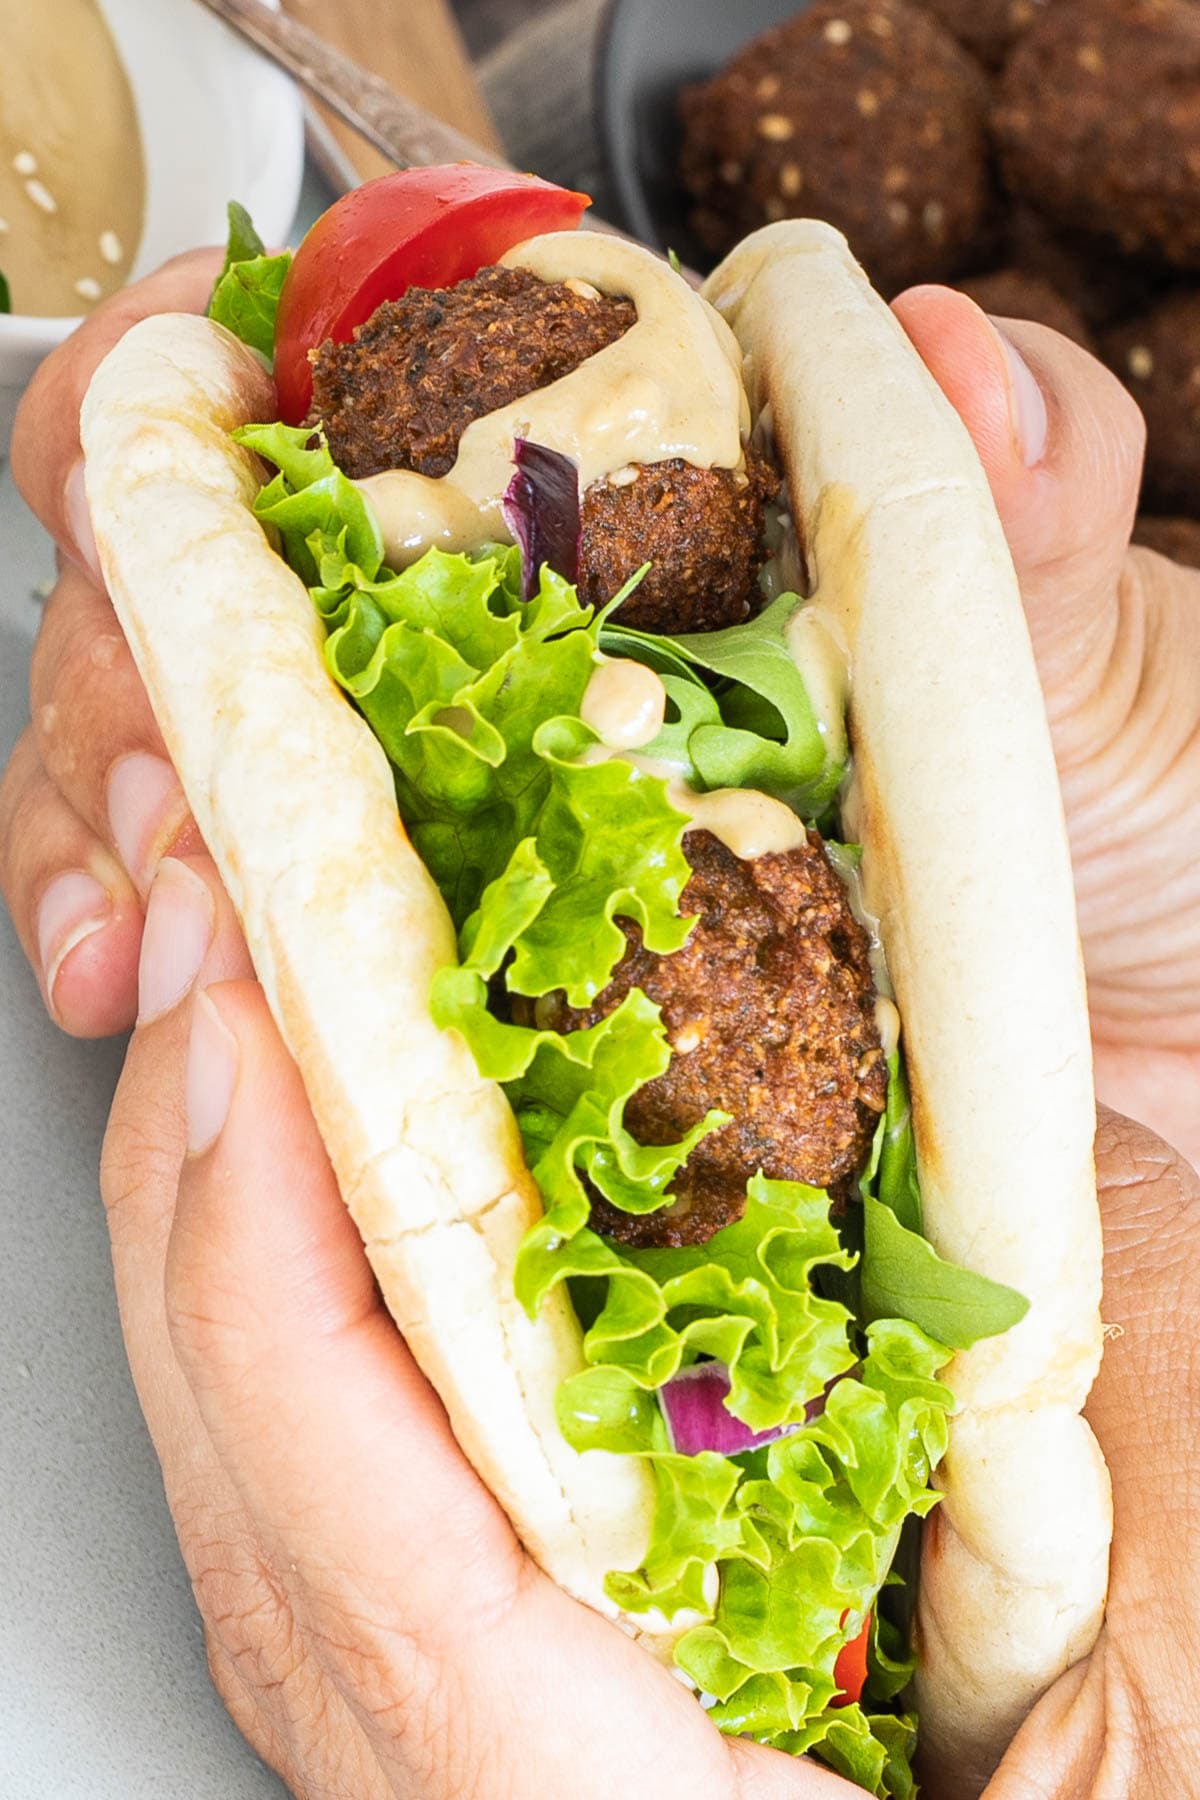 A hand is holding two pita breads as a sandwich filled with dark brown falafel bowls, vibrant green ruffled lettuce and light brown thick sauce.